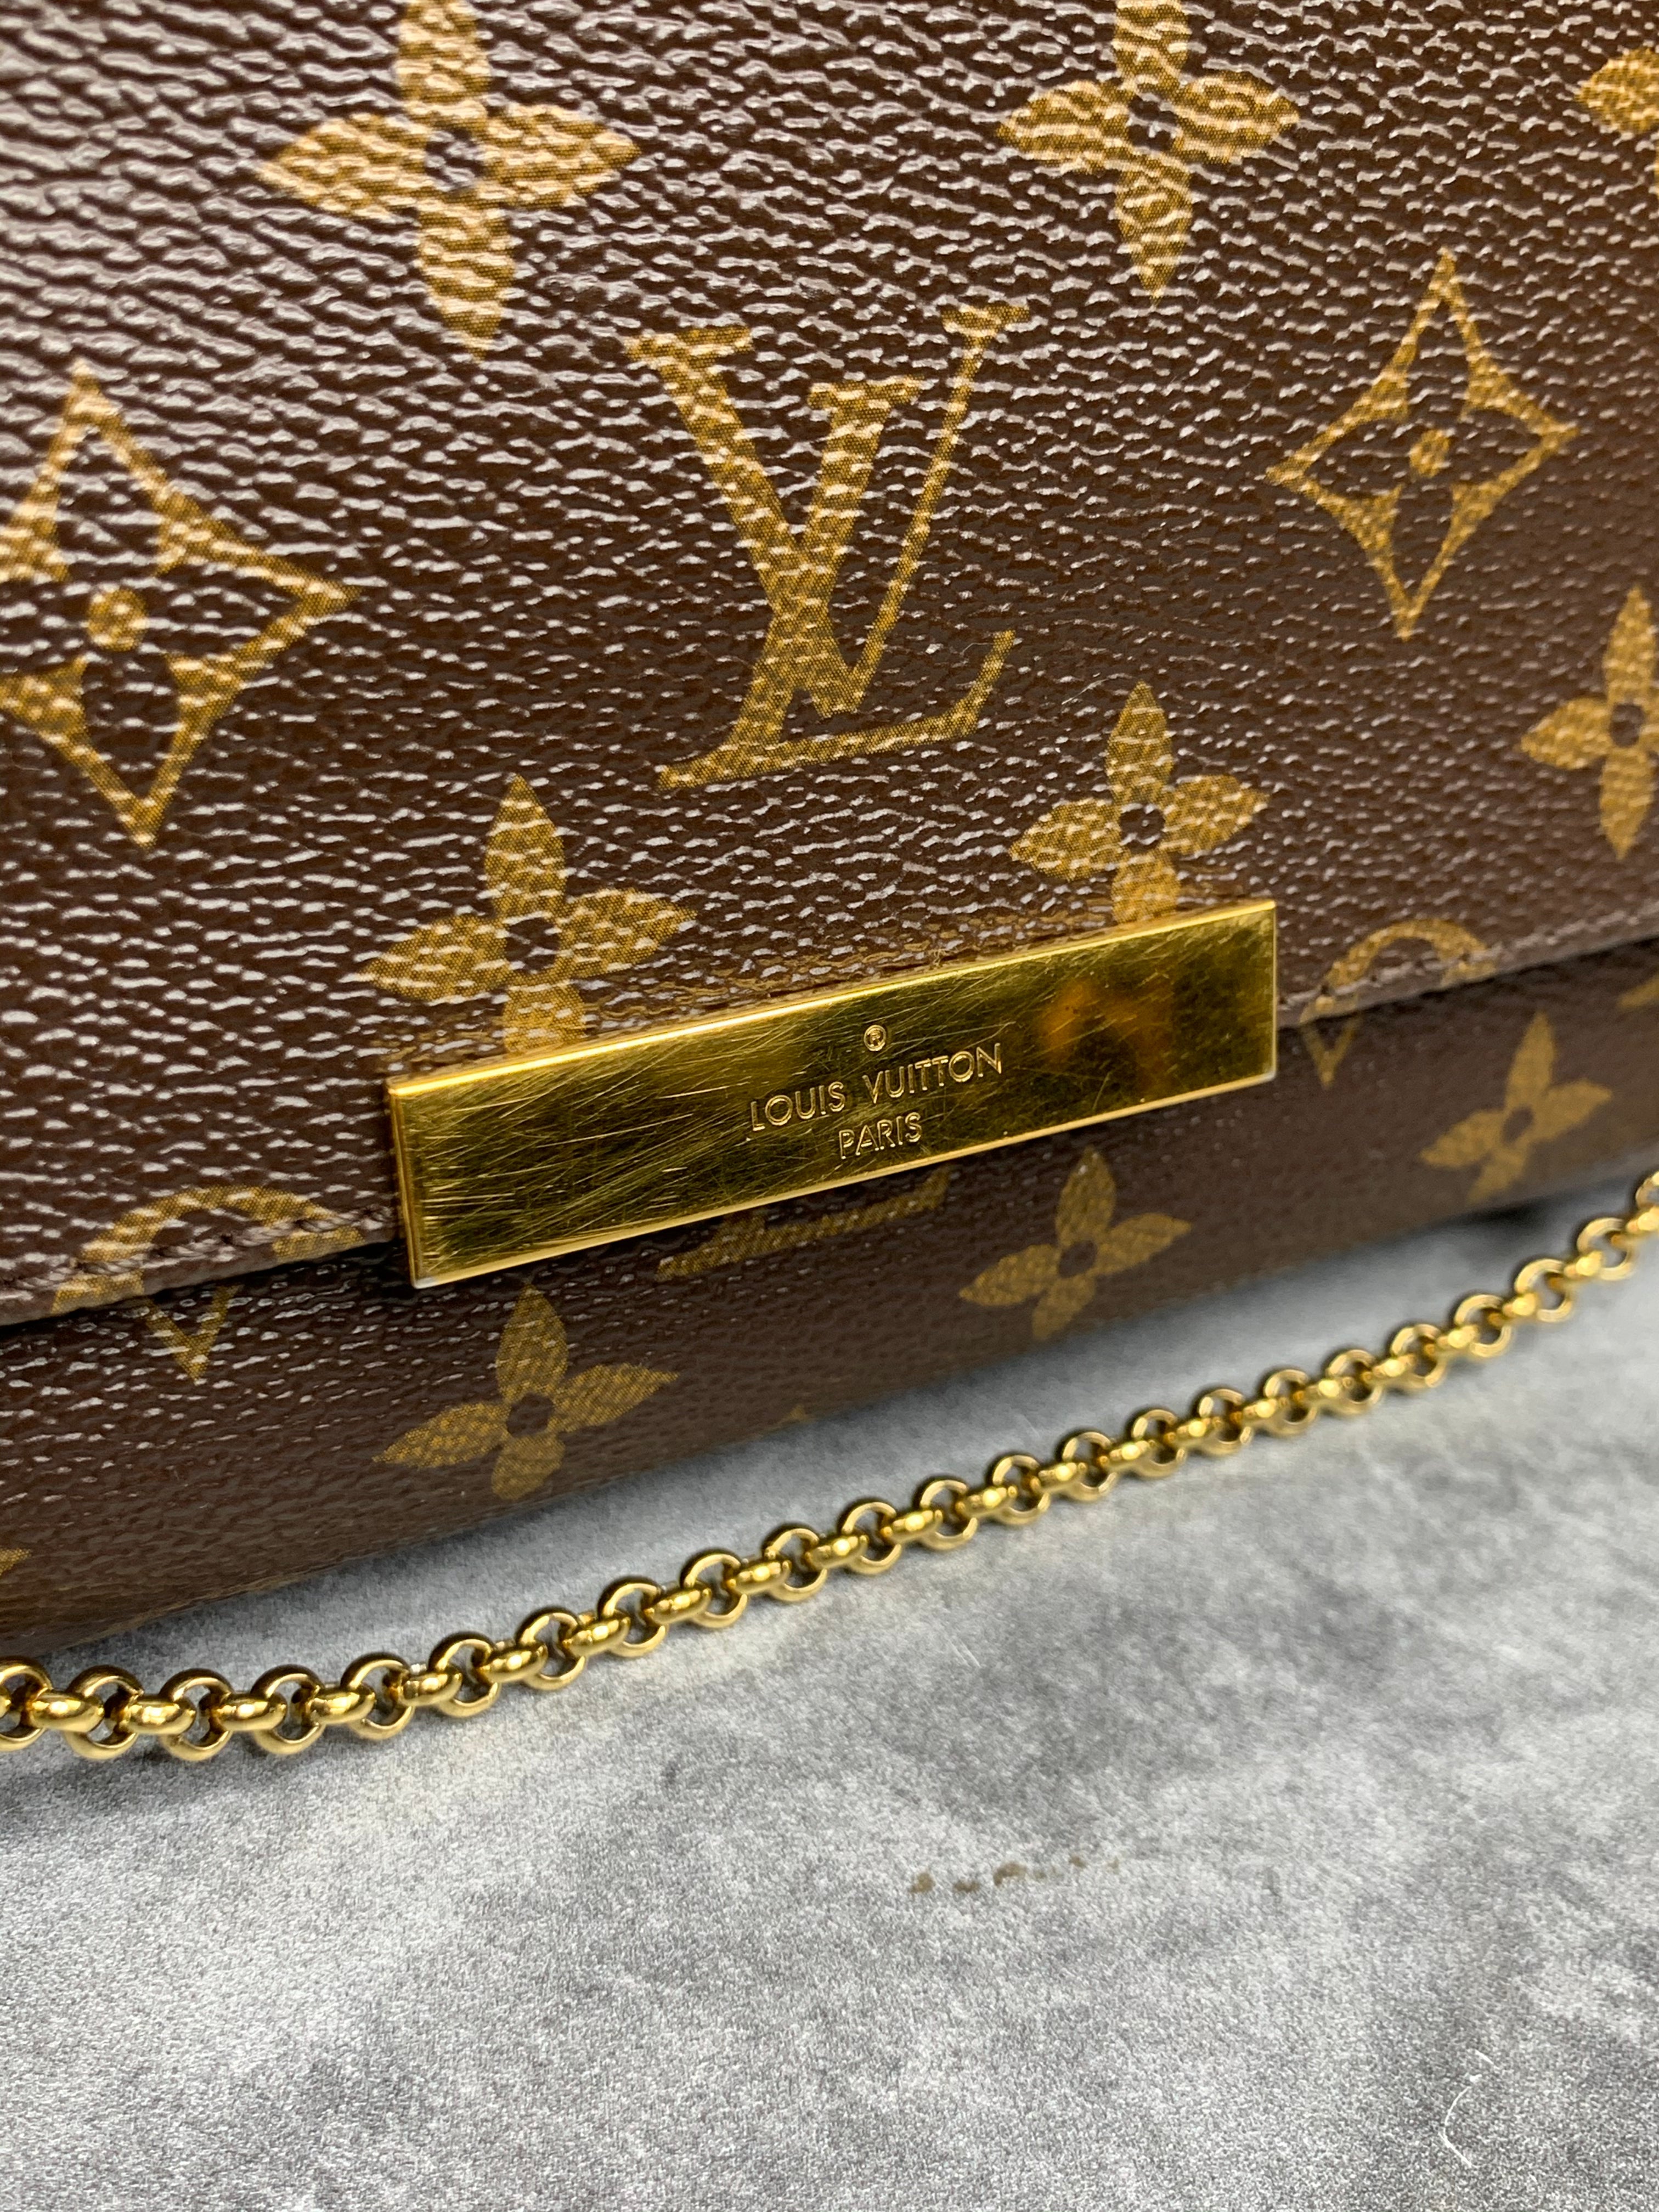 ❤️SOLD) Louis Vuitton Monogram Favorite MM is on the website for